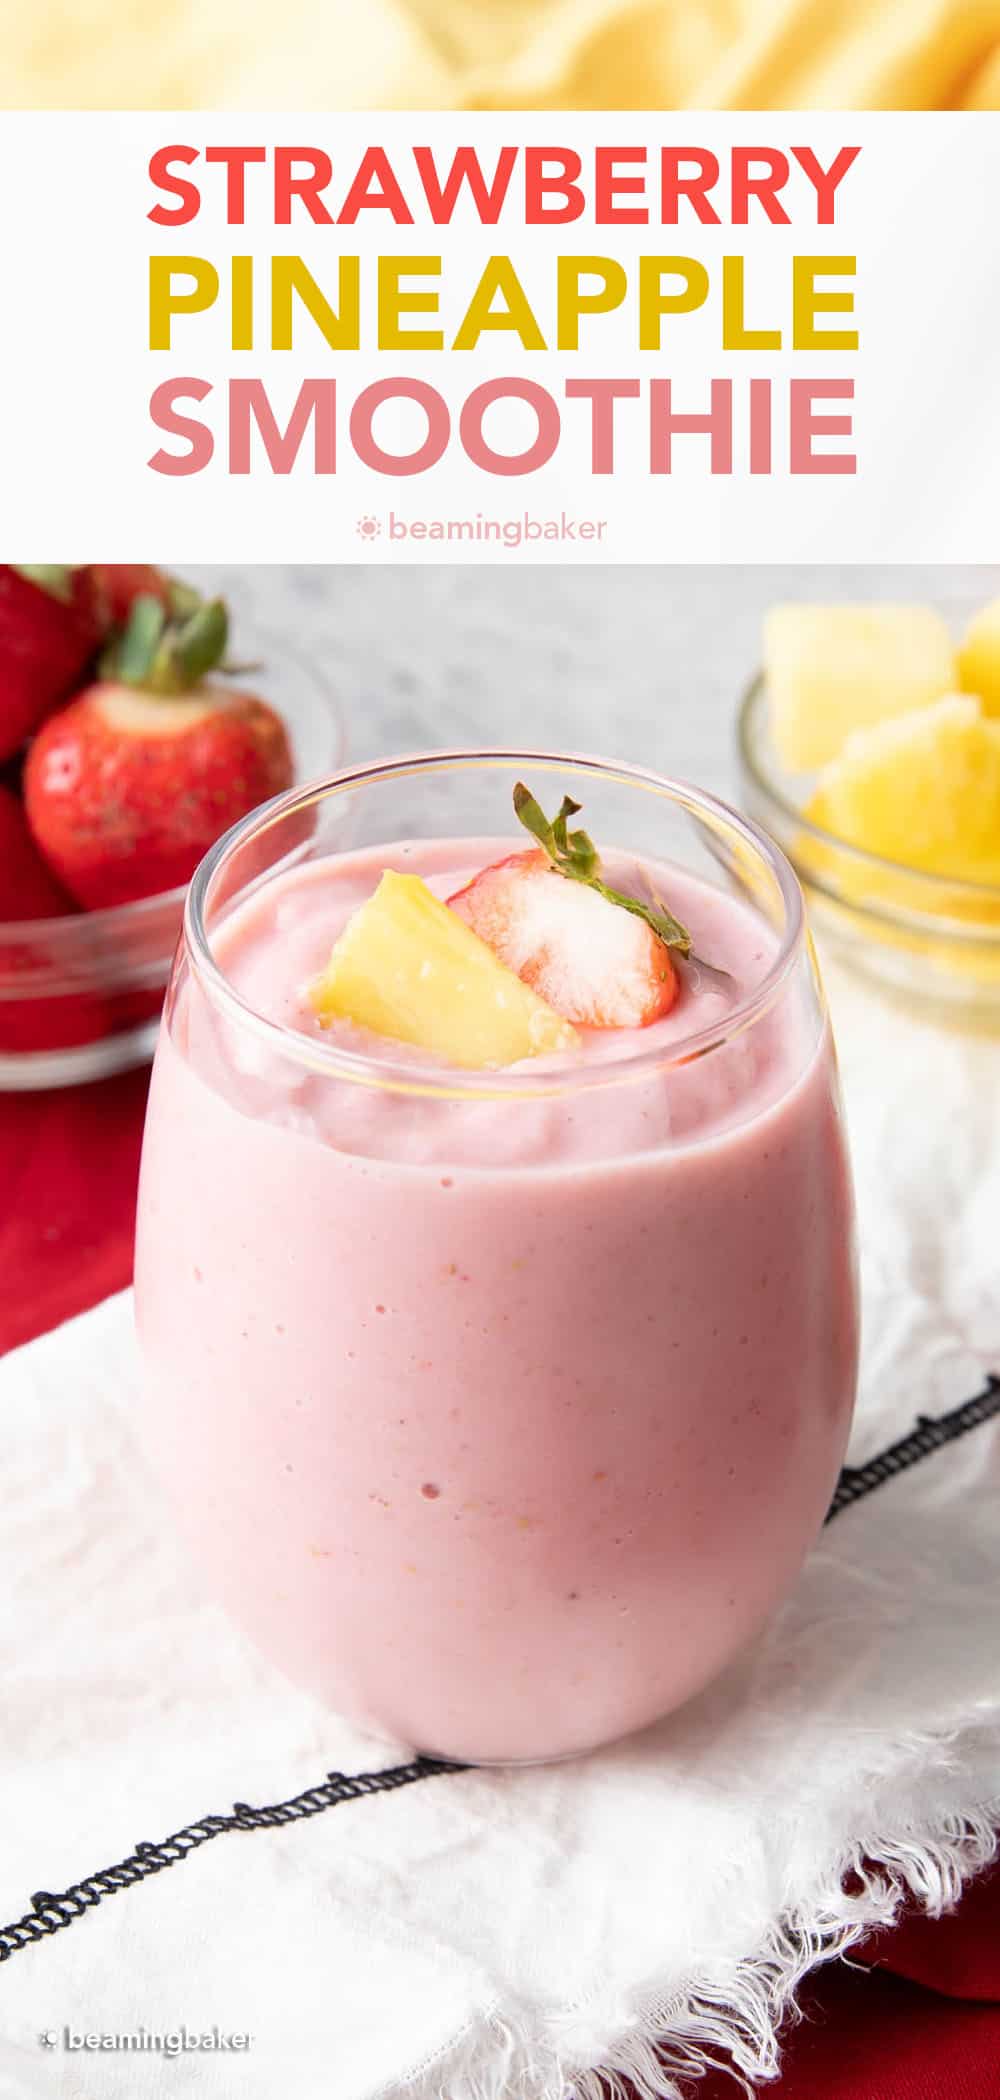 3 Ingredient Strawberry Pineapple Smoothie – a refreshingly simple strawberry pineapple smoothie made with just 3 ingredients! Frosty ‘n thick with refreshing fruity flavor. #Strawberry #Pineapple #Smoothie | Recipe at BeamingBaker.com